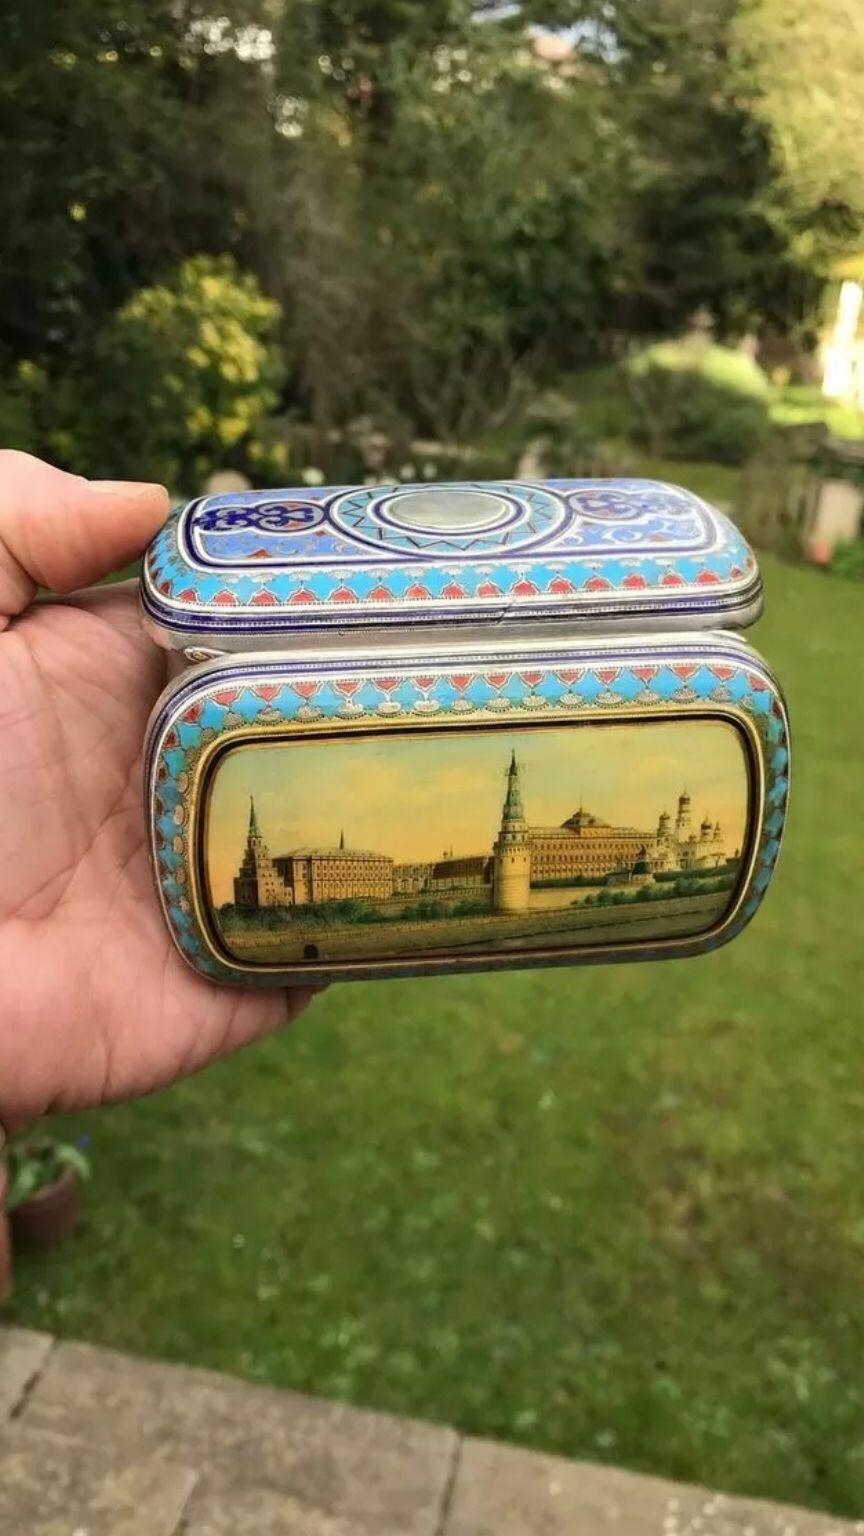 An Antique Imperial Russian Cloisonné Enamel Solid Silver Cigarette case - By well known silversmith - Image 6 of 11